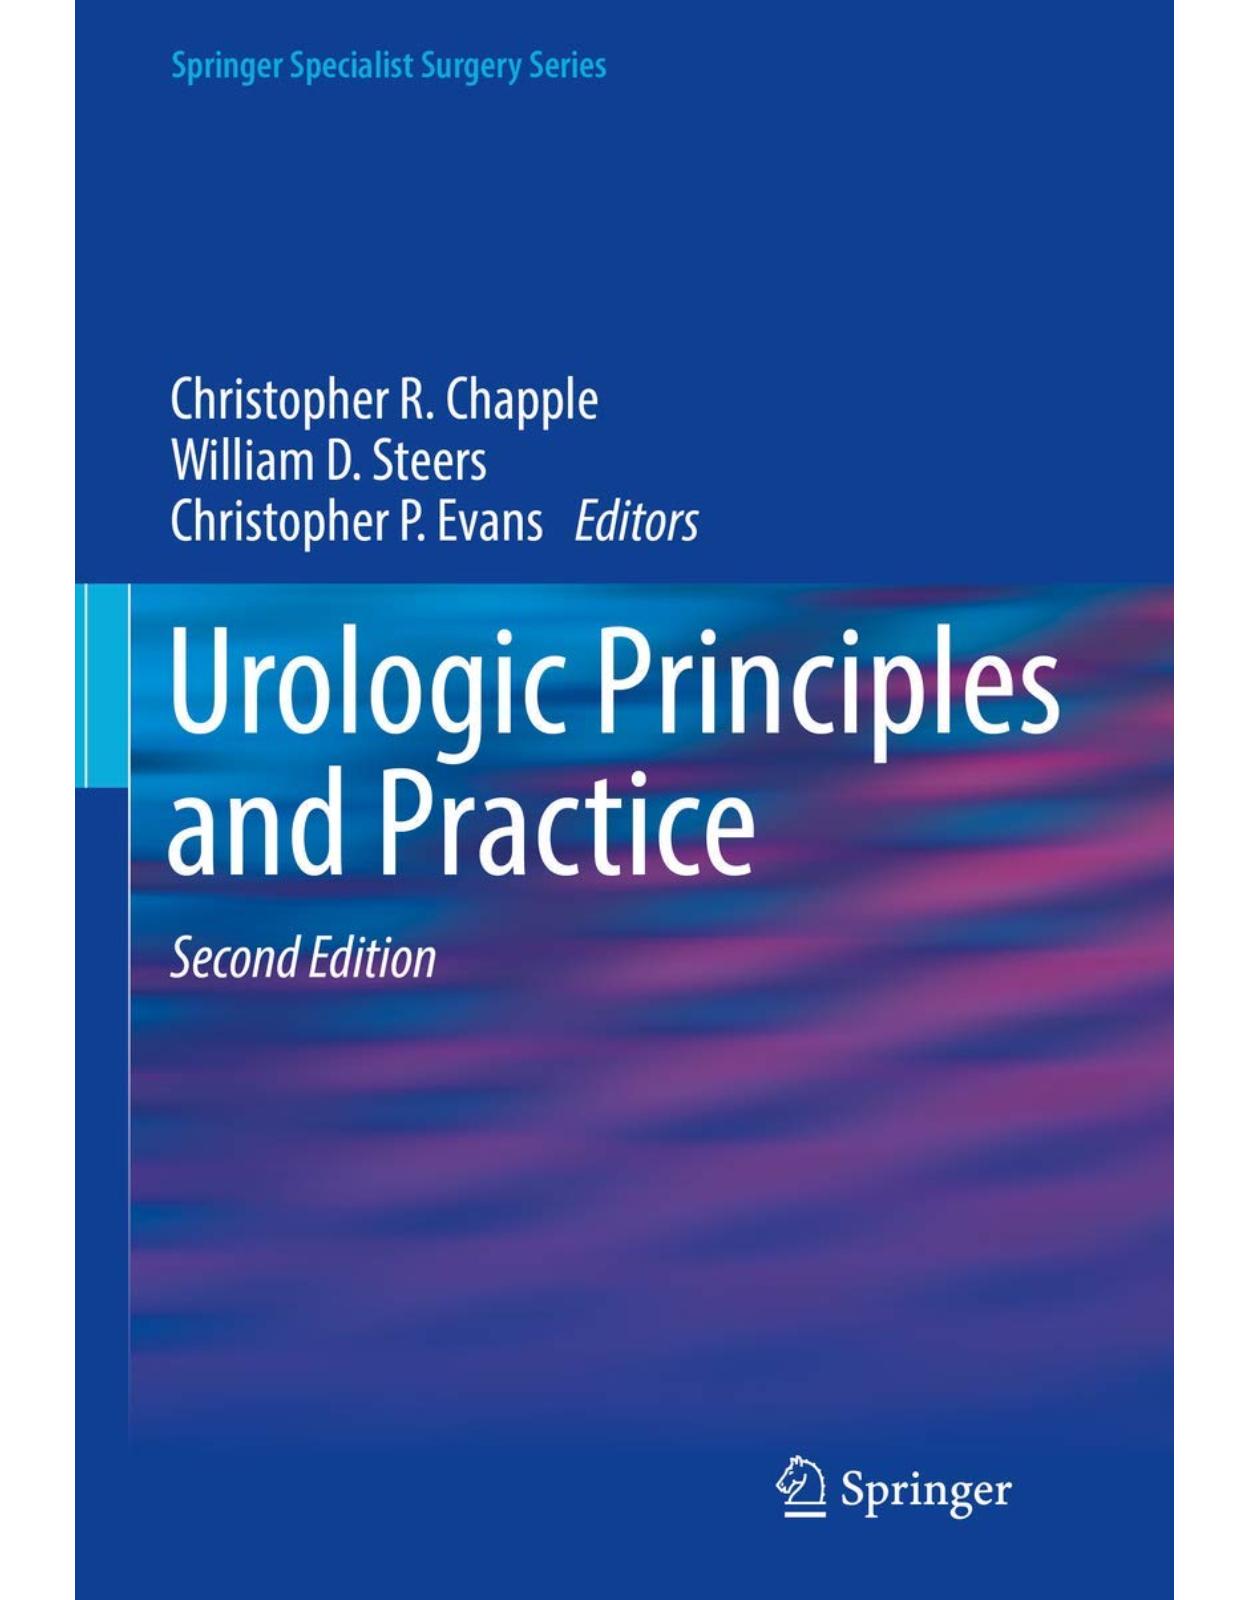 Urologic Principles and Practice. Second Edition